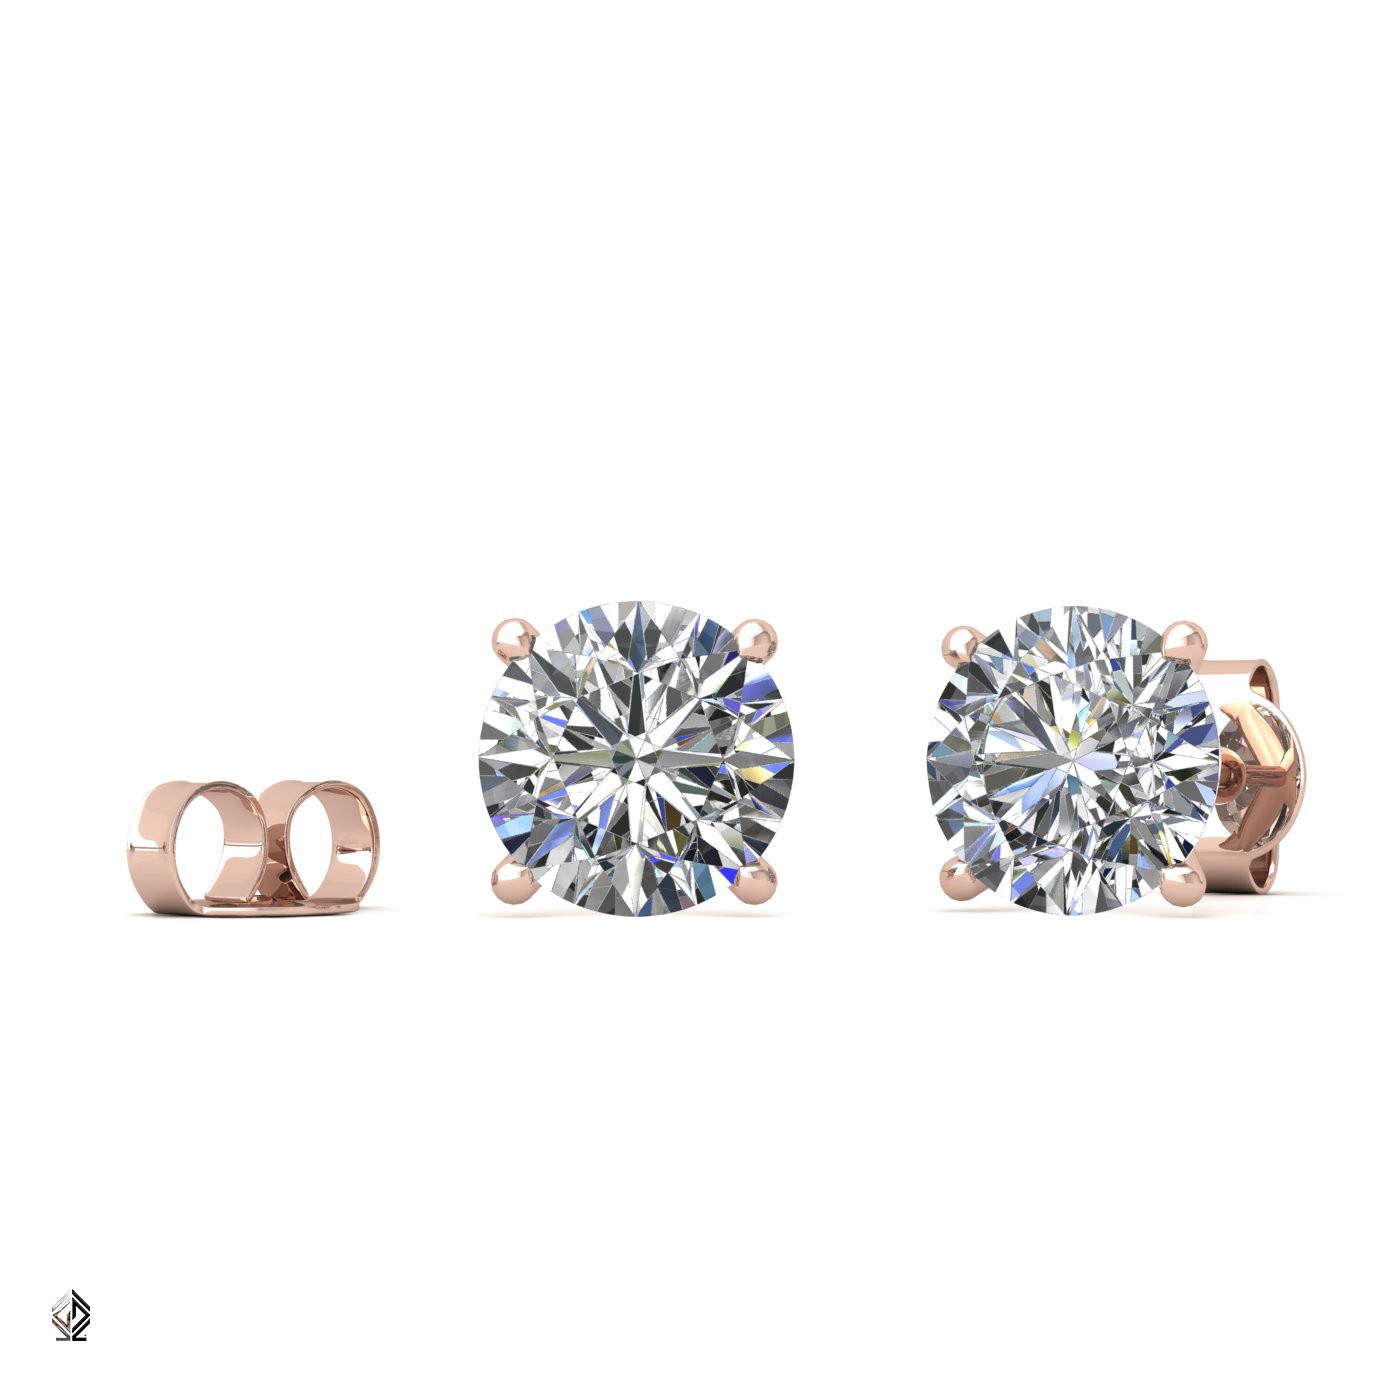 18k rose gold 0,7 ct each (1,4 tcw) 4 prongs round cut classic diamond earring studs Photos & images